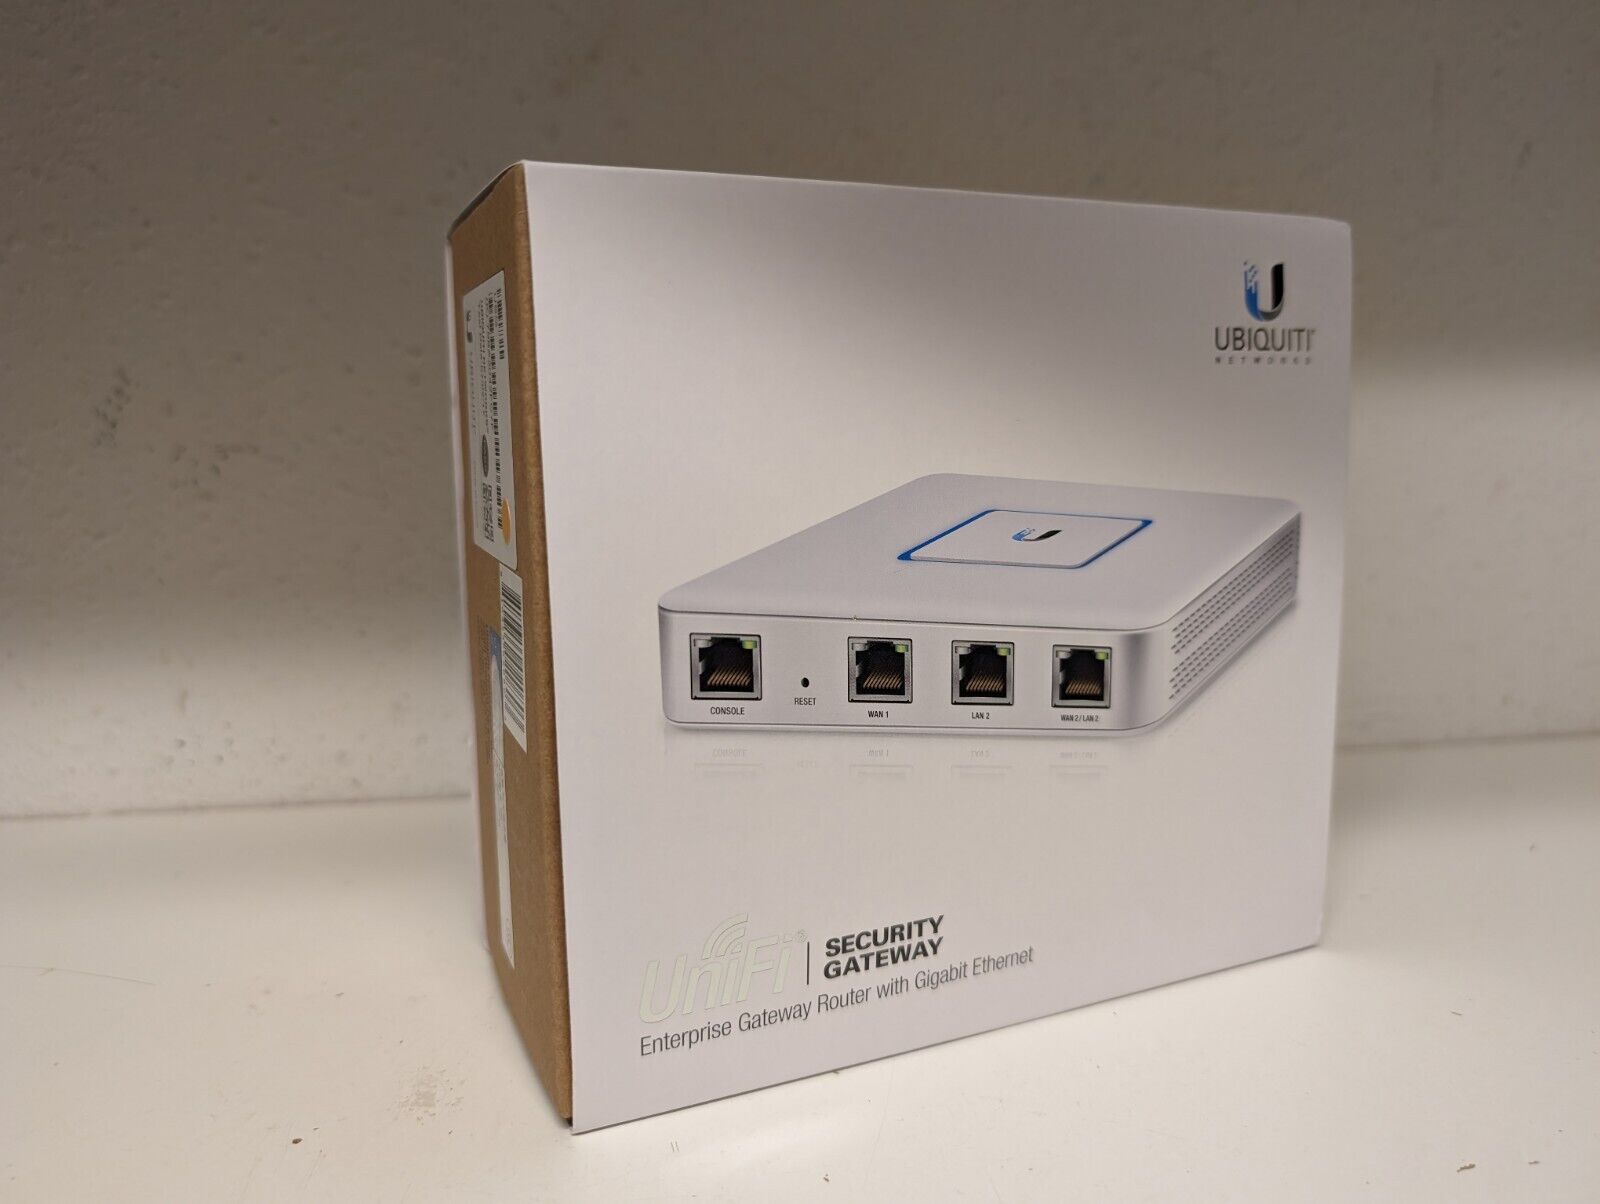 Ubiquiti Unifi USG Security Gateway Router/Firewall - Complete - NICE